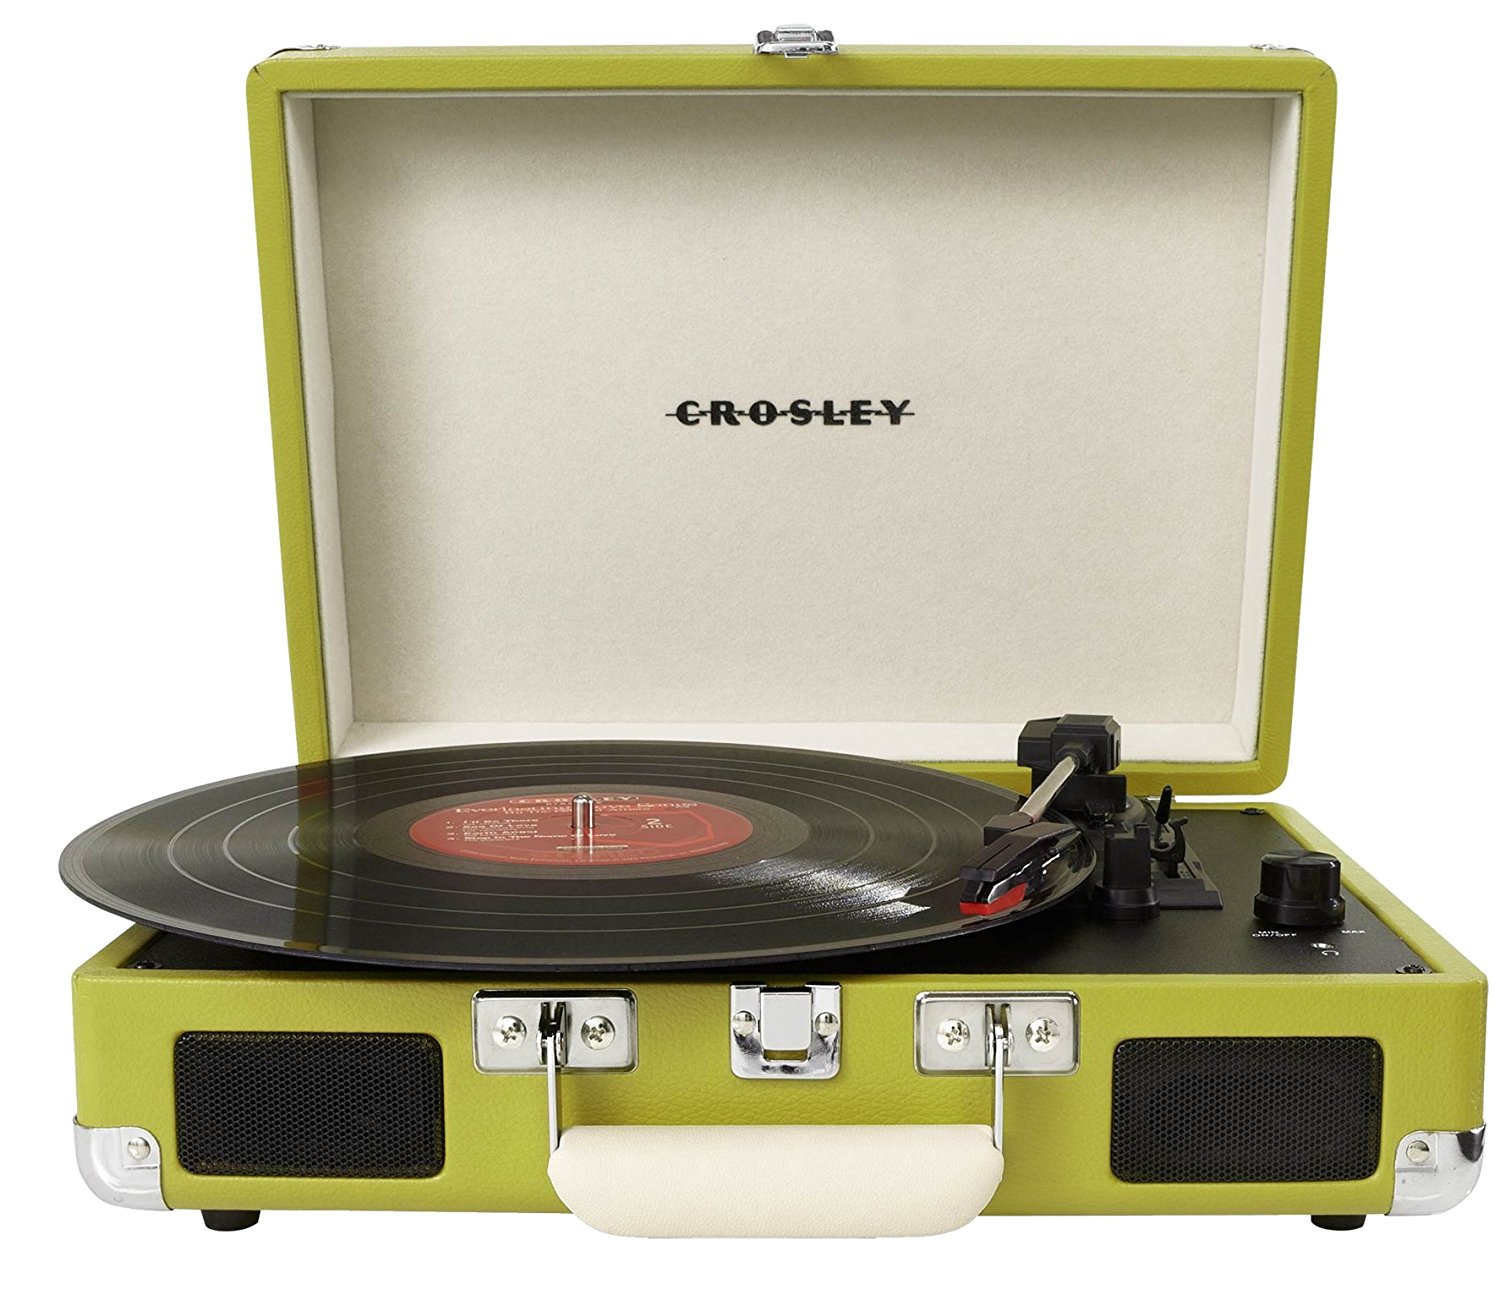 Chartreuse Portable Turntable